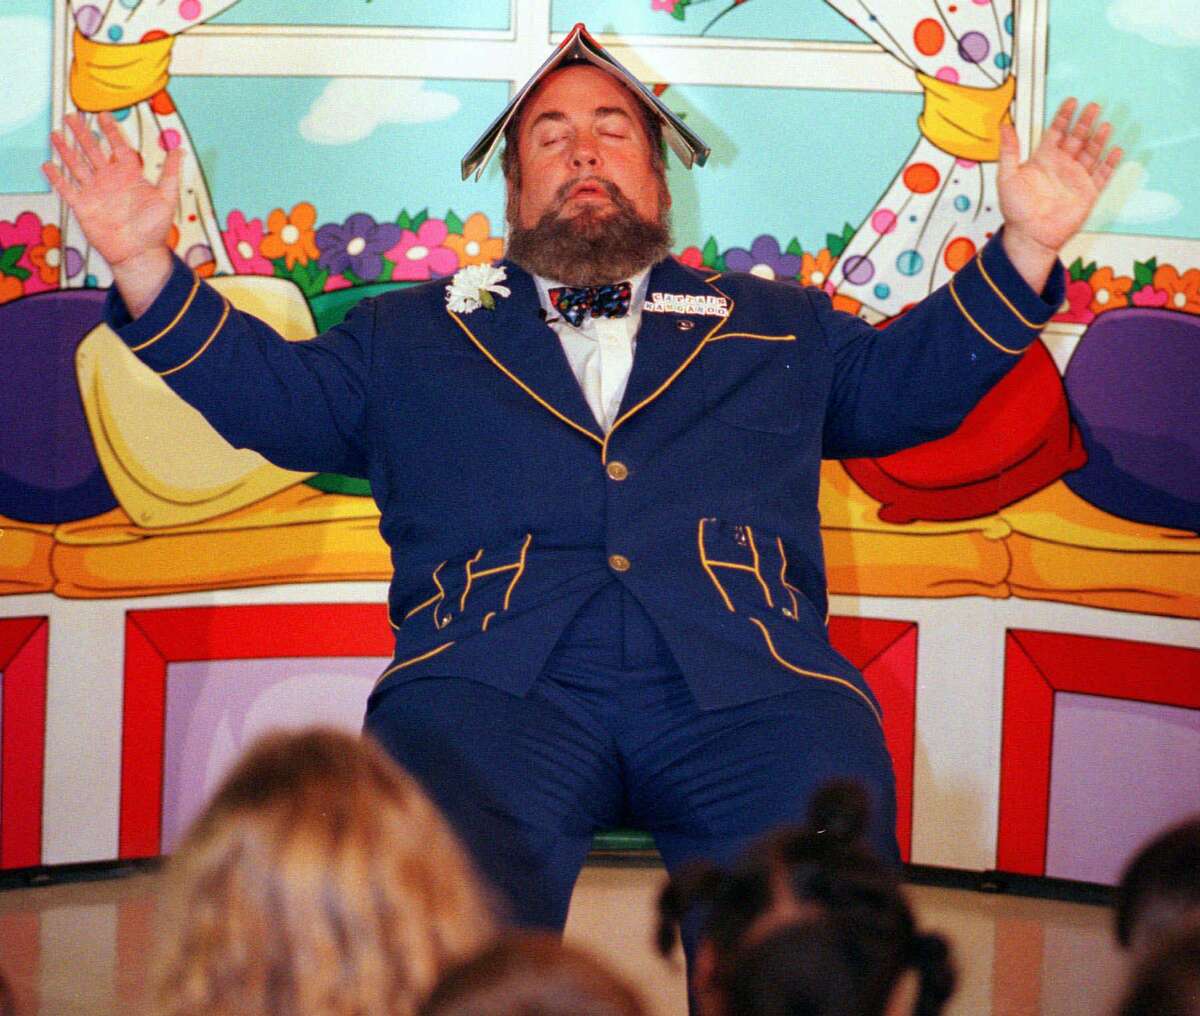 Captain Kangaroo, (John McDonough,) acts out a part of the book he is reading to children at Belding Elementary School in Chicago, Thursday, Sept. 24, 1998. The Captain is promoting reading during an 11-city 'Captain Kangaroo Storybook Corner Tour.' (AP Photo/Fox Family Channel, Jonathan Kirn)